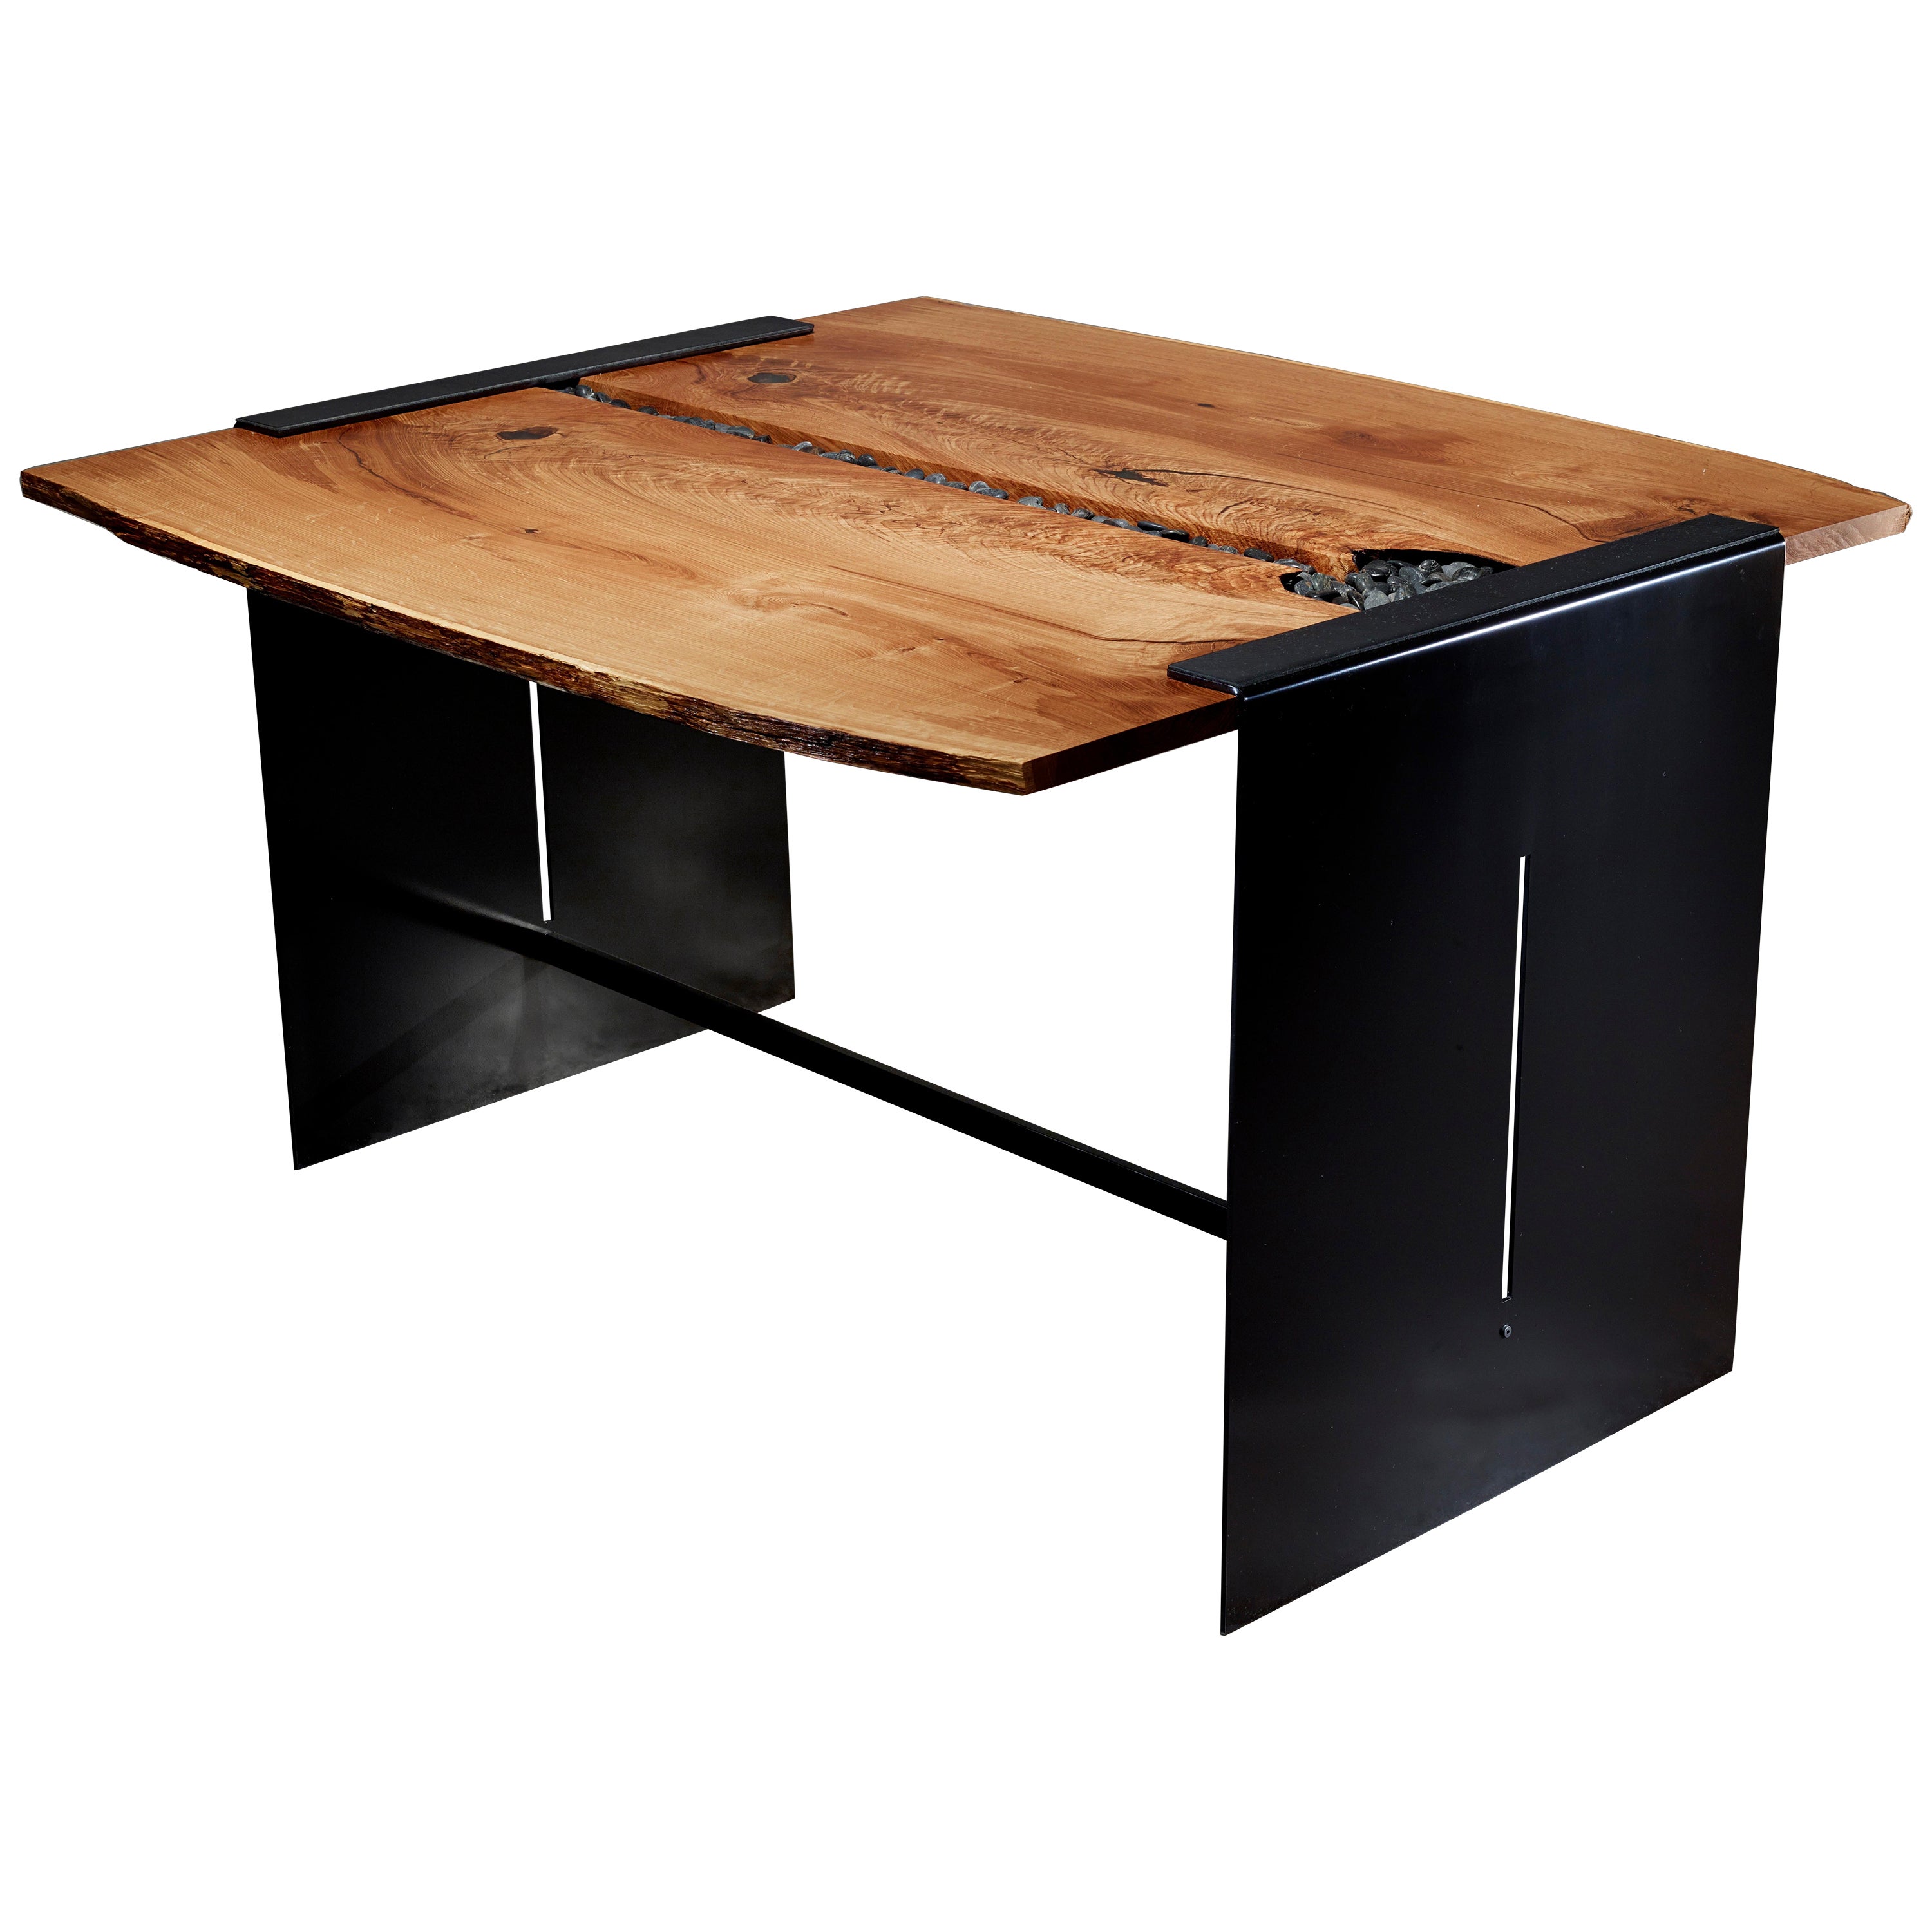 Organic Modern Dining Table with California White Oak and Aluminum: Tranquility